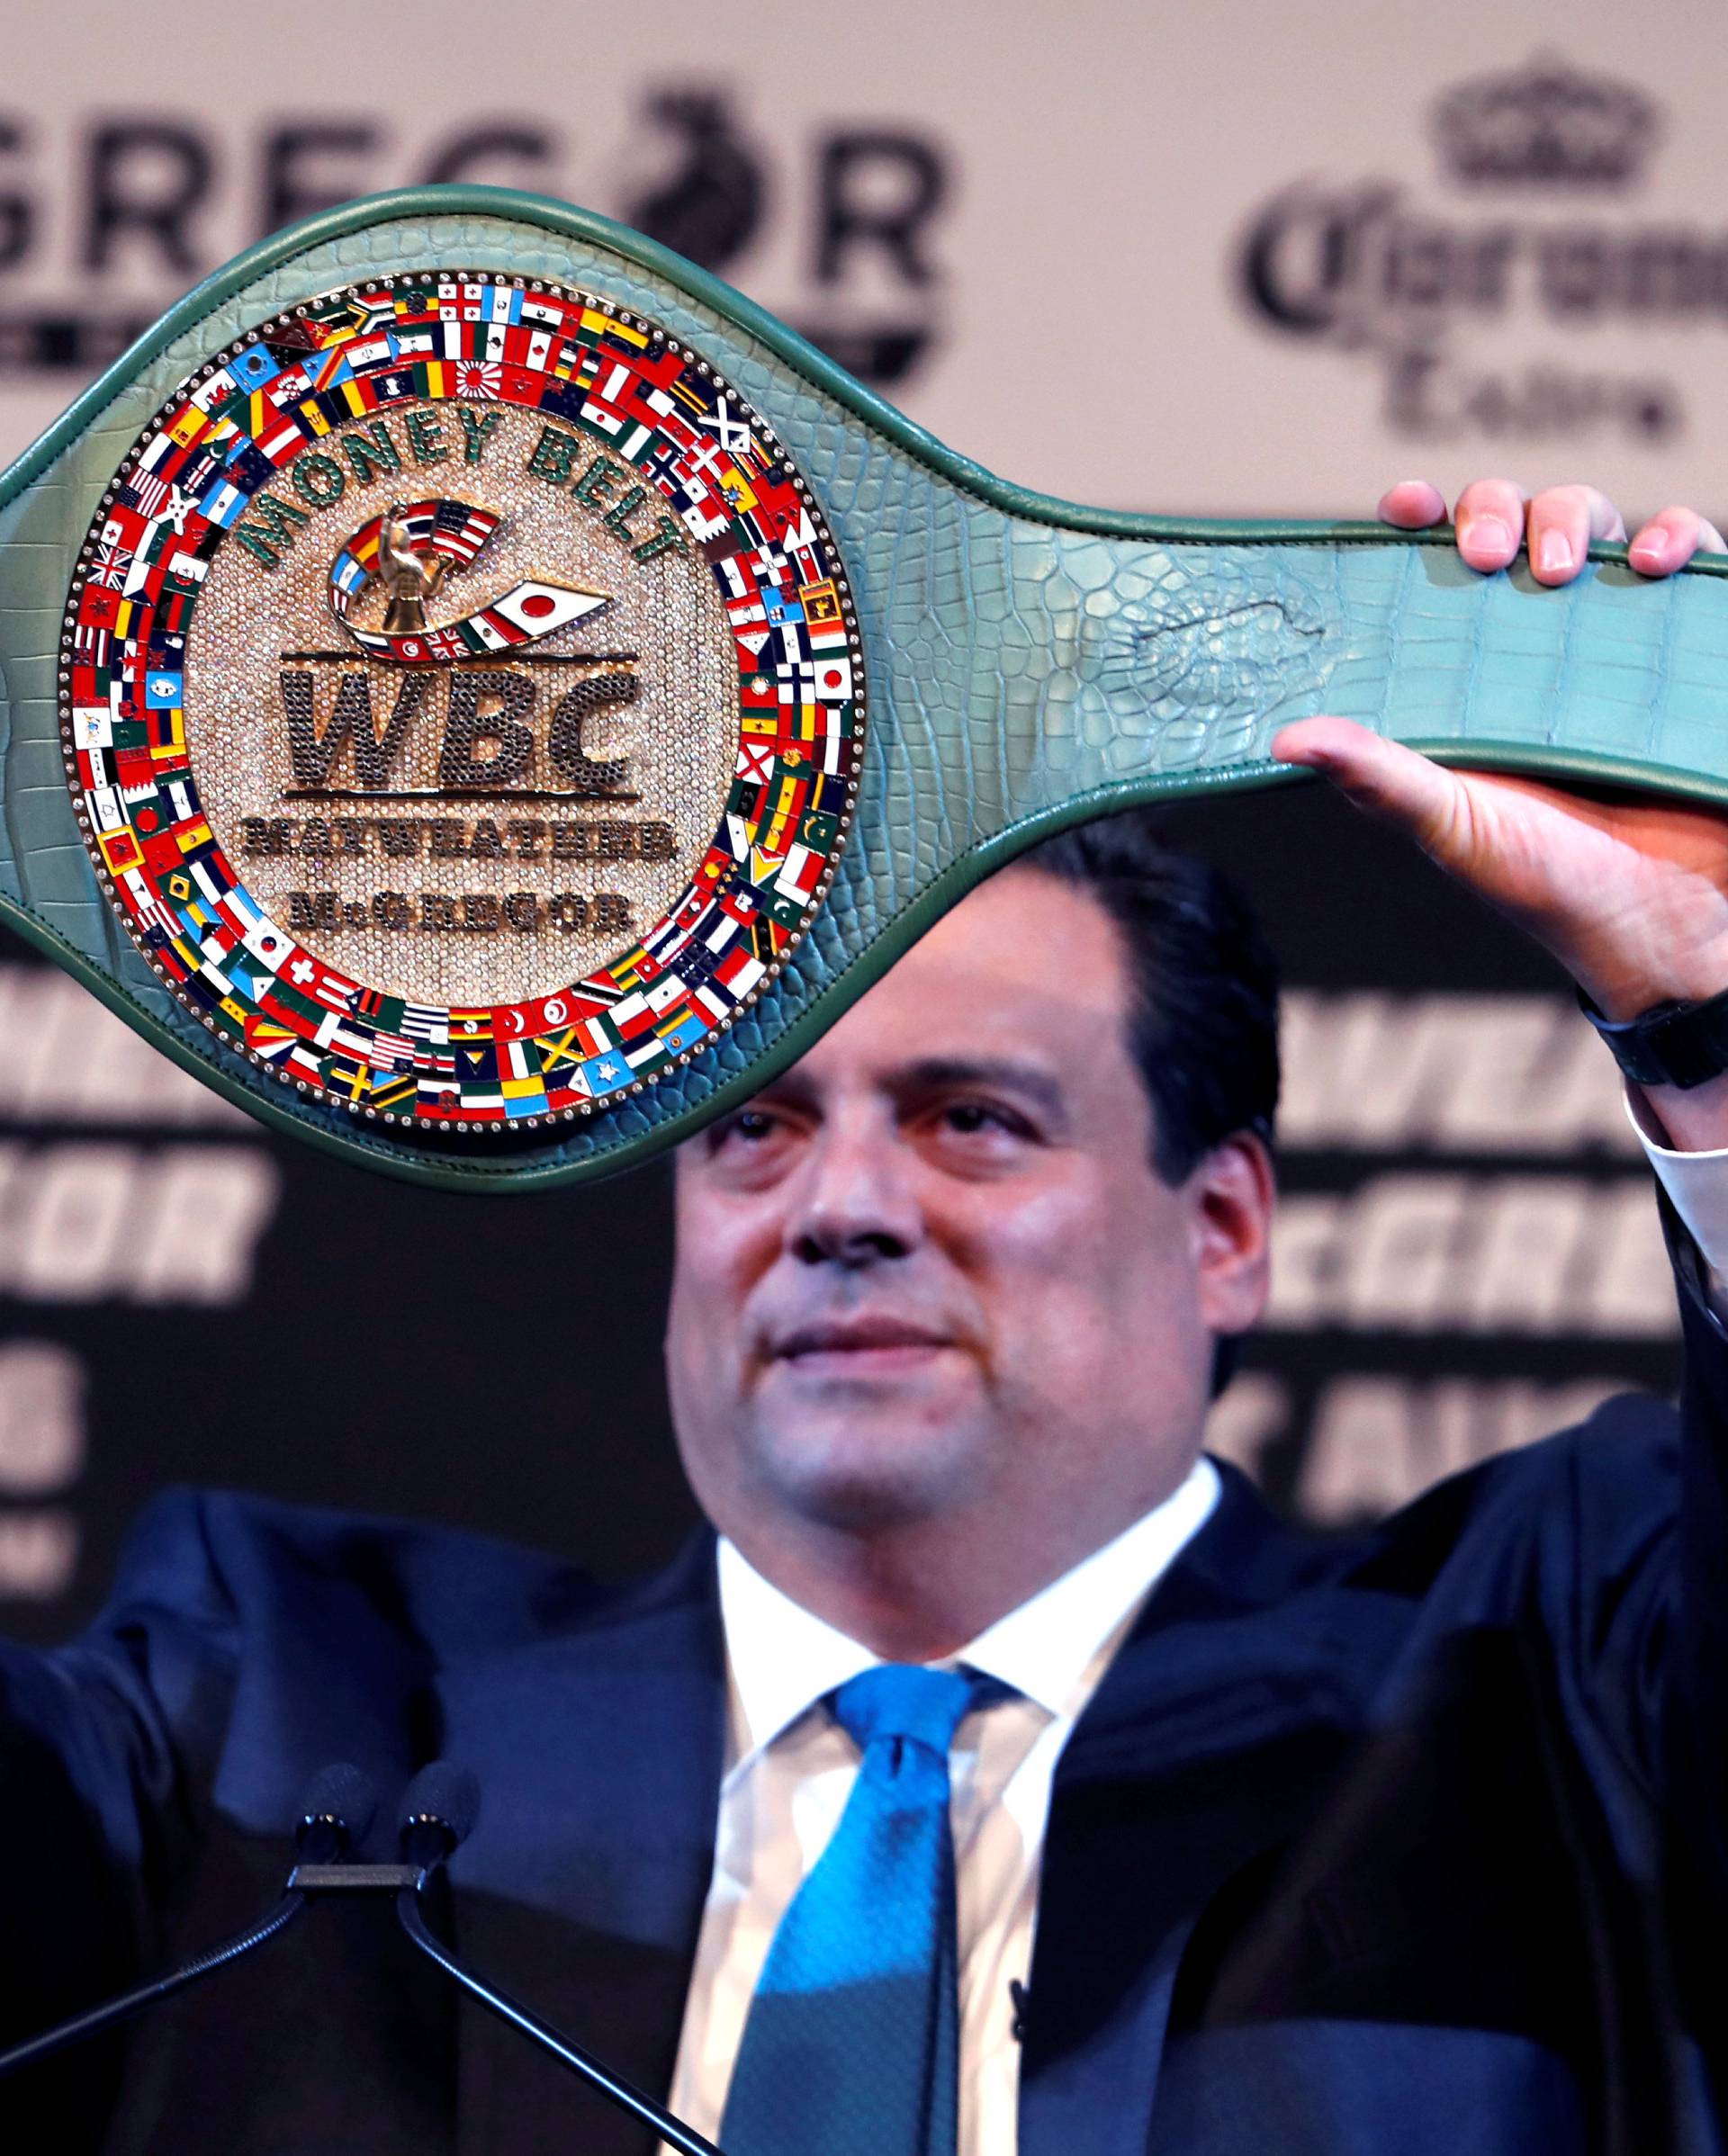 WBC President Mauricio Sulaiman holds up the WBC "Money Belt" during a news conference with undefeated boxer Floyd Mayweather Jr. of the U.S. and UFC lightweight champion Conor McGregor of Ireland in Las Vegas